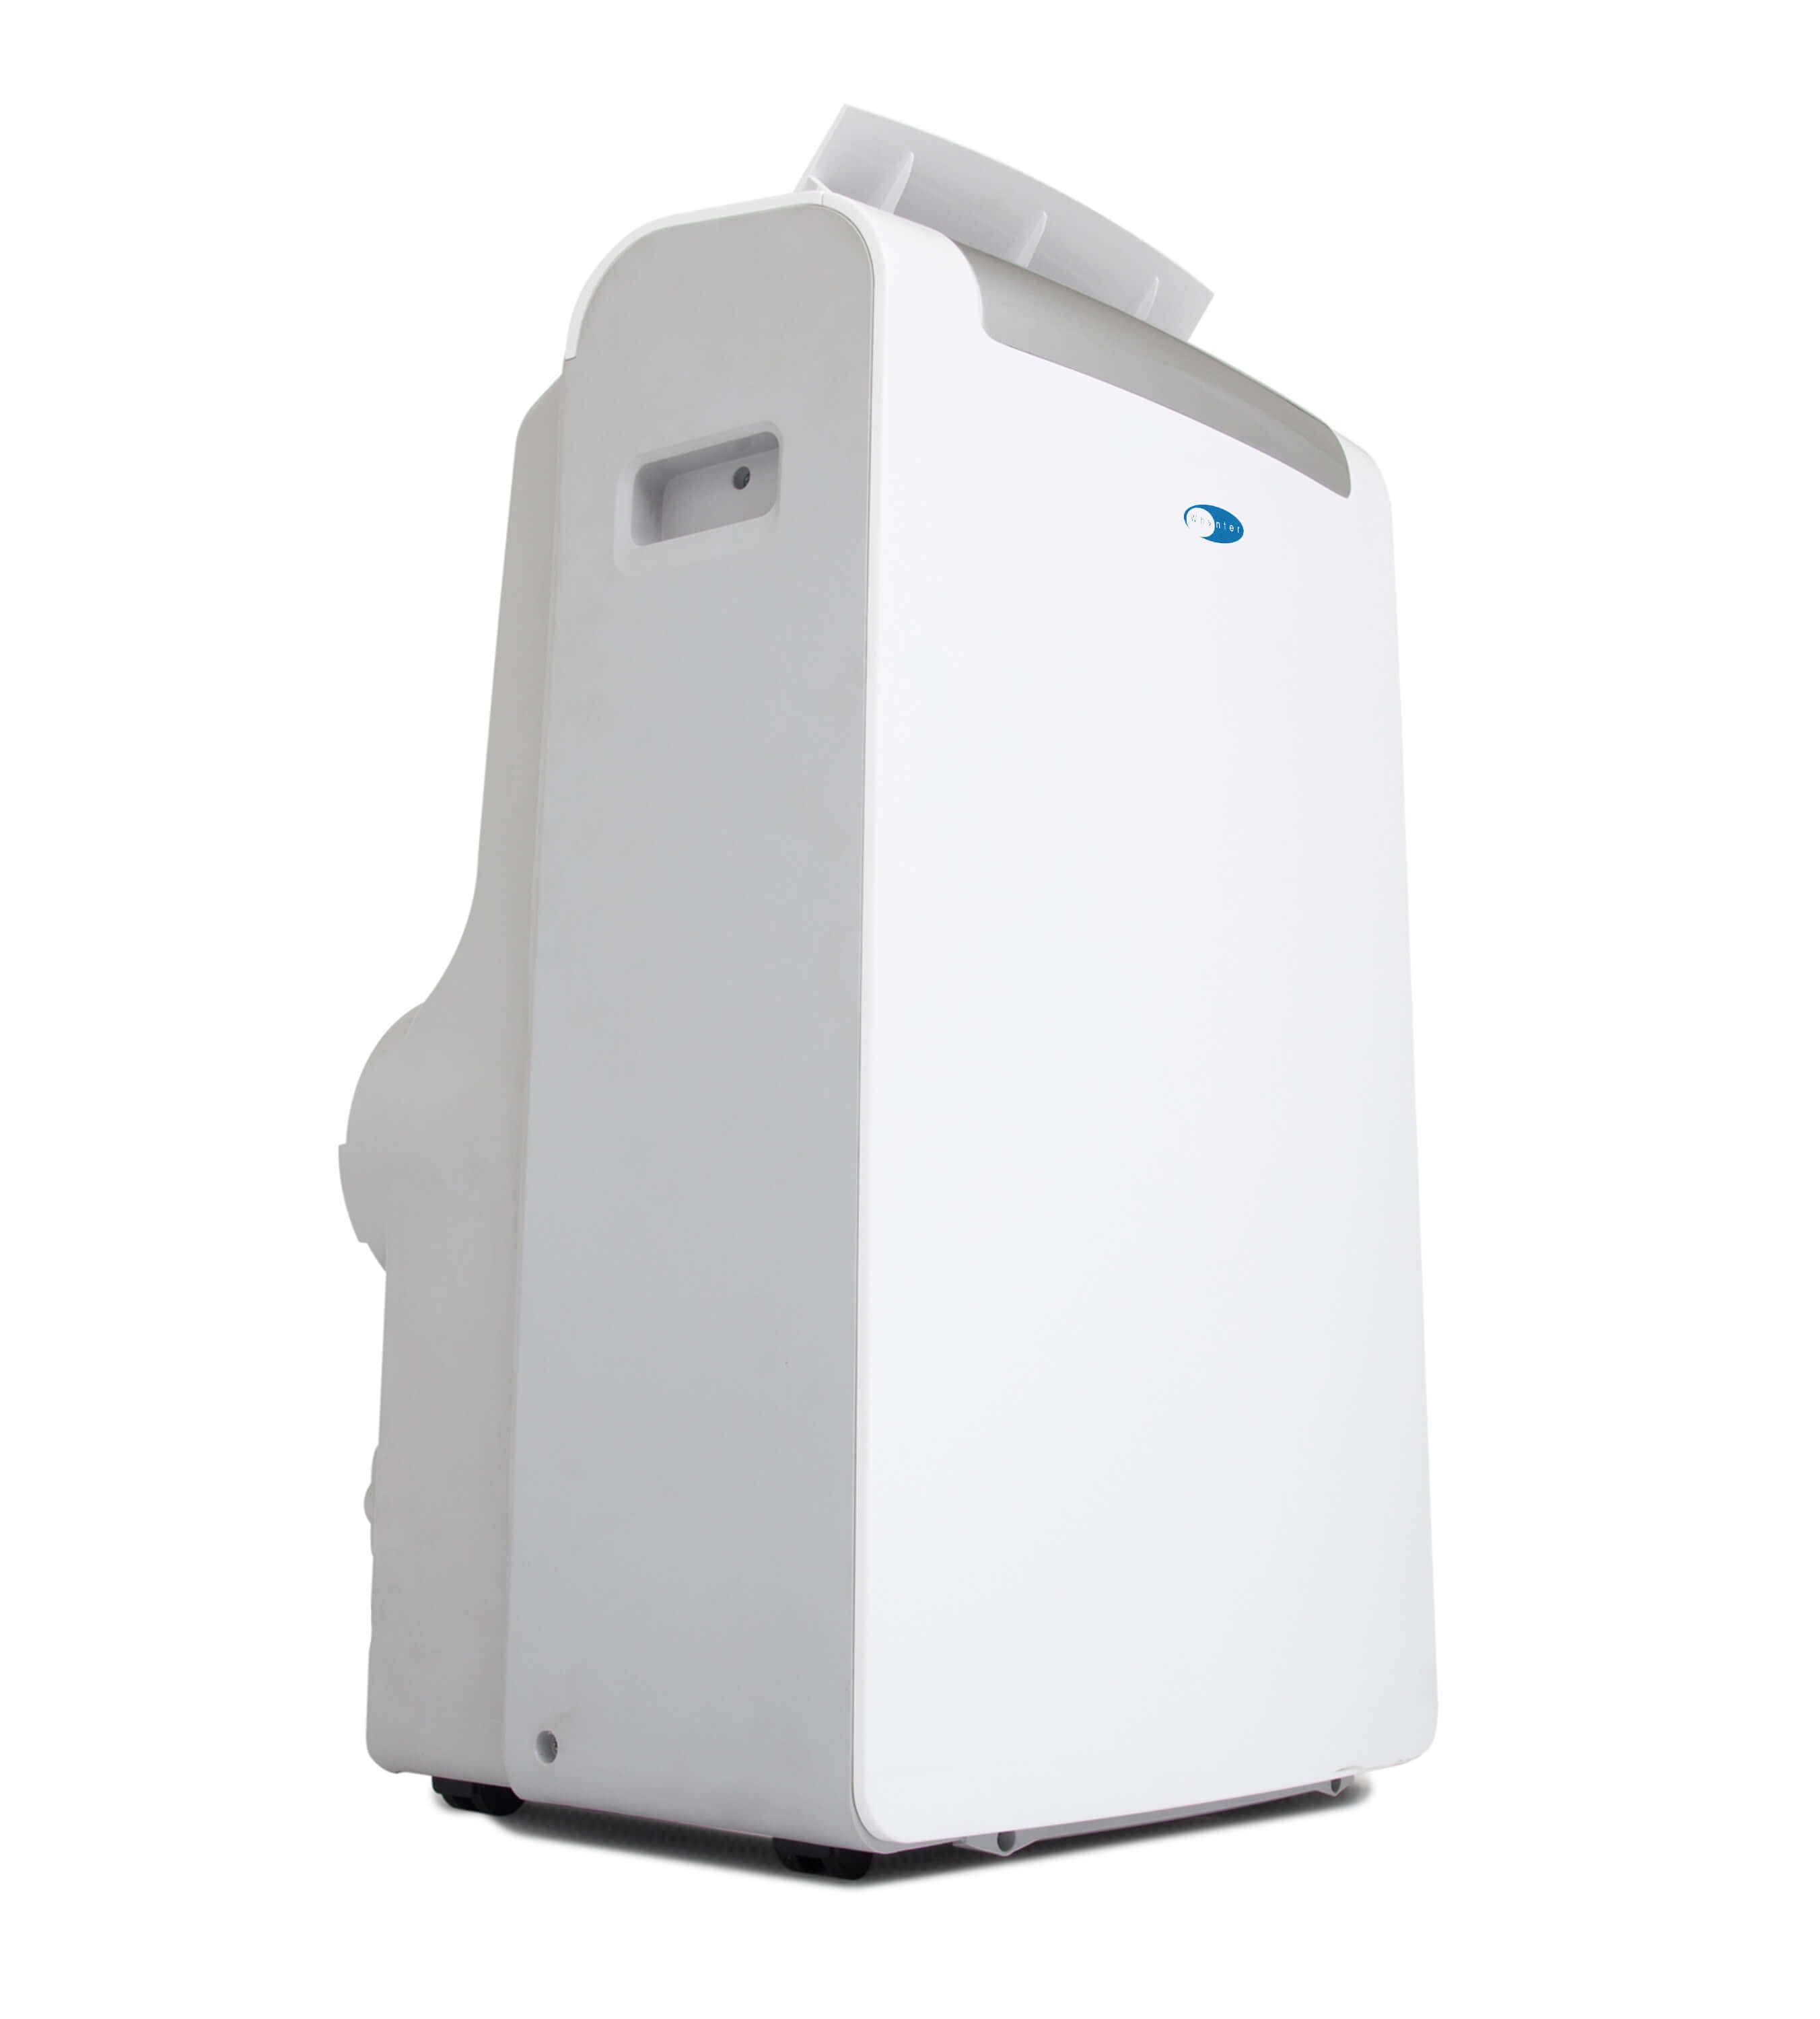 Whynter ARC-148MS 14,000-BTU Portable Air Conditioner with 3M SilverShield  Filter - White